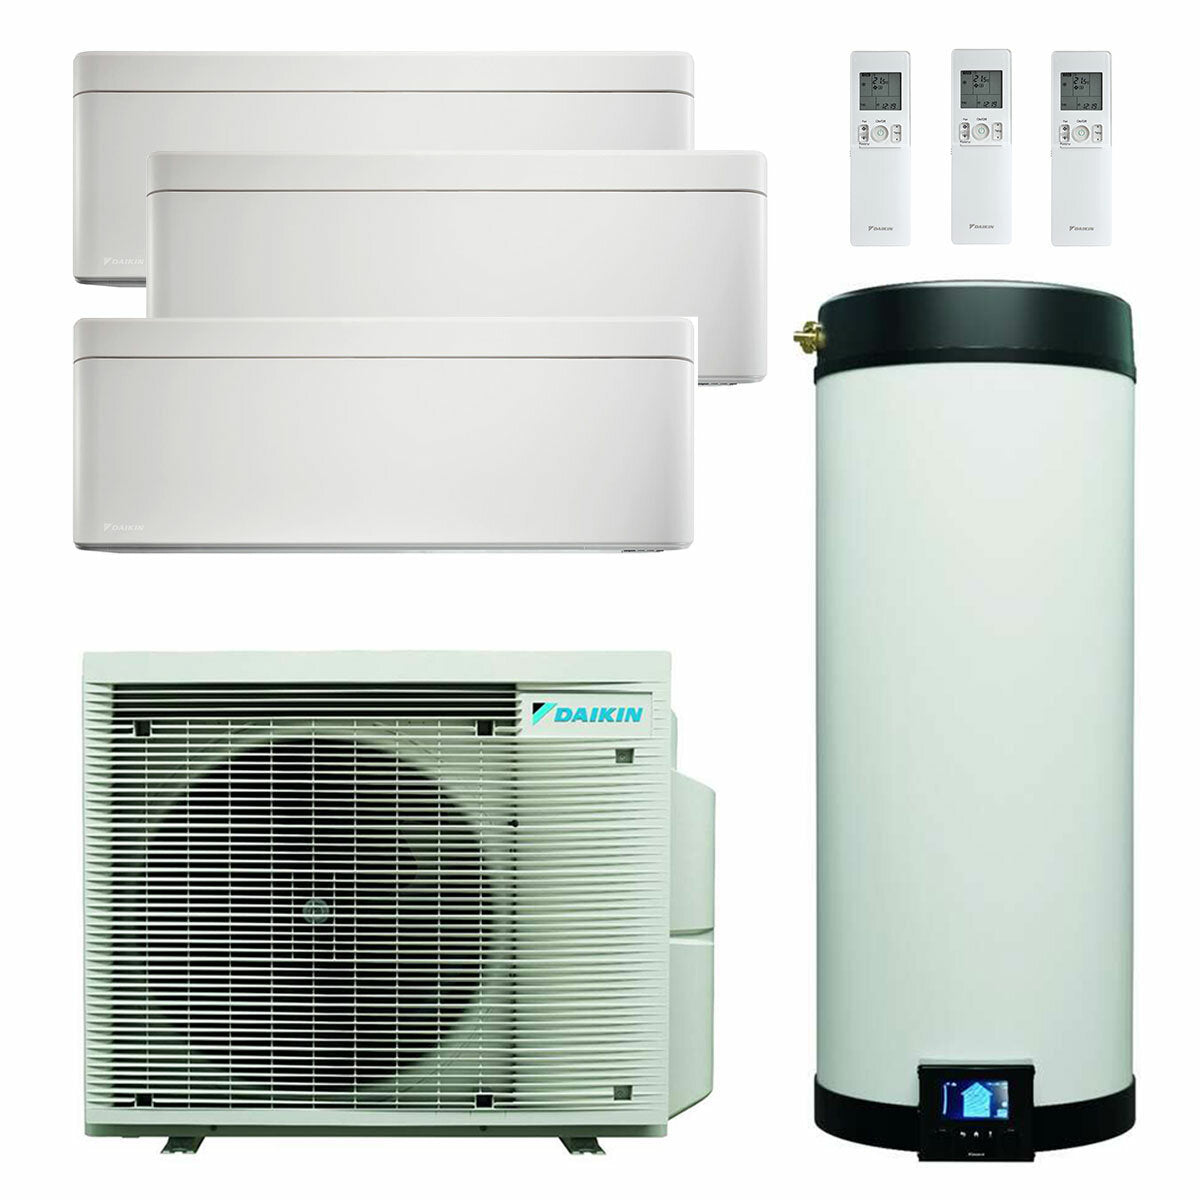 Daikin Multi+ trial split air conditioning system and domestic hot water - Stylish white indoor units 9000+9000+12000 BTU - 120 l tank